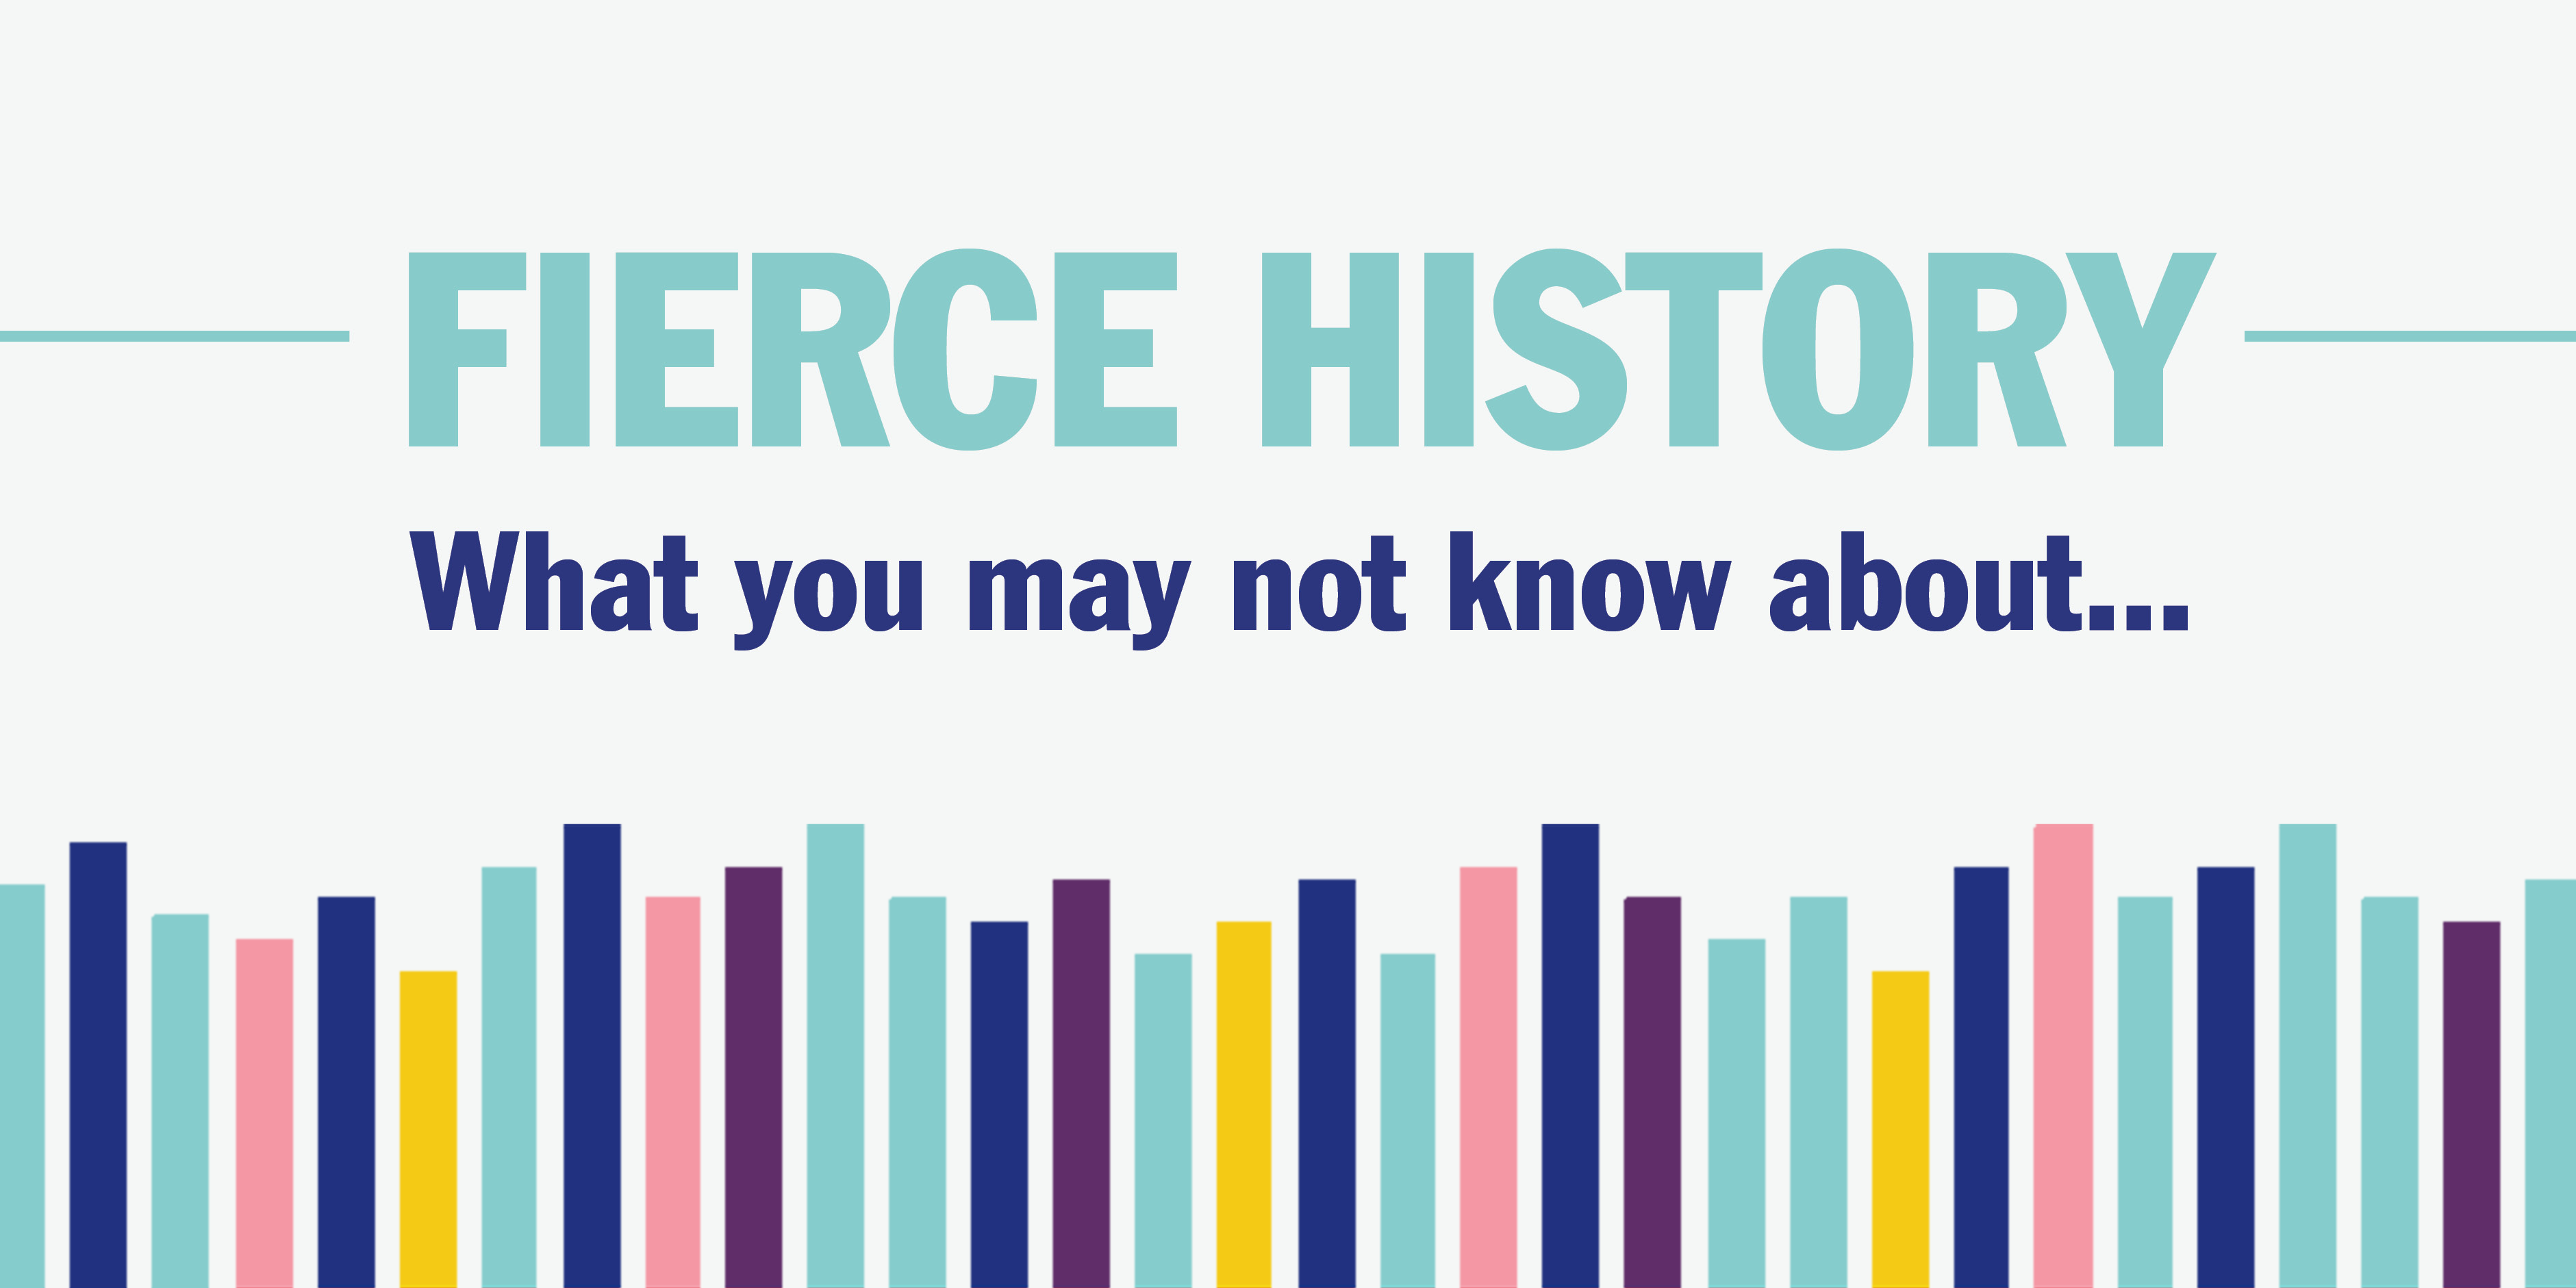 Fierce History: What You May Not Know About…